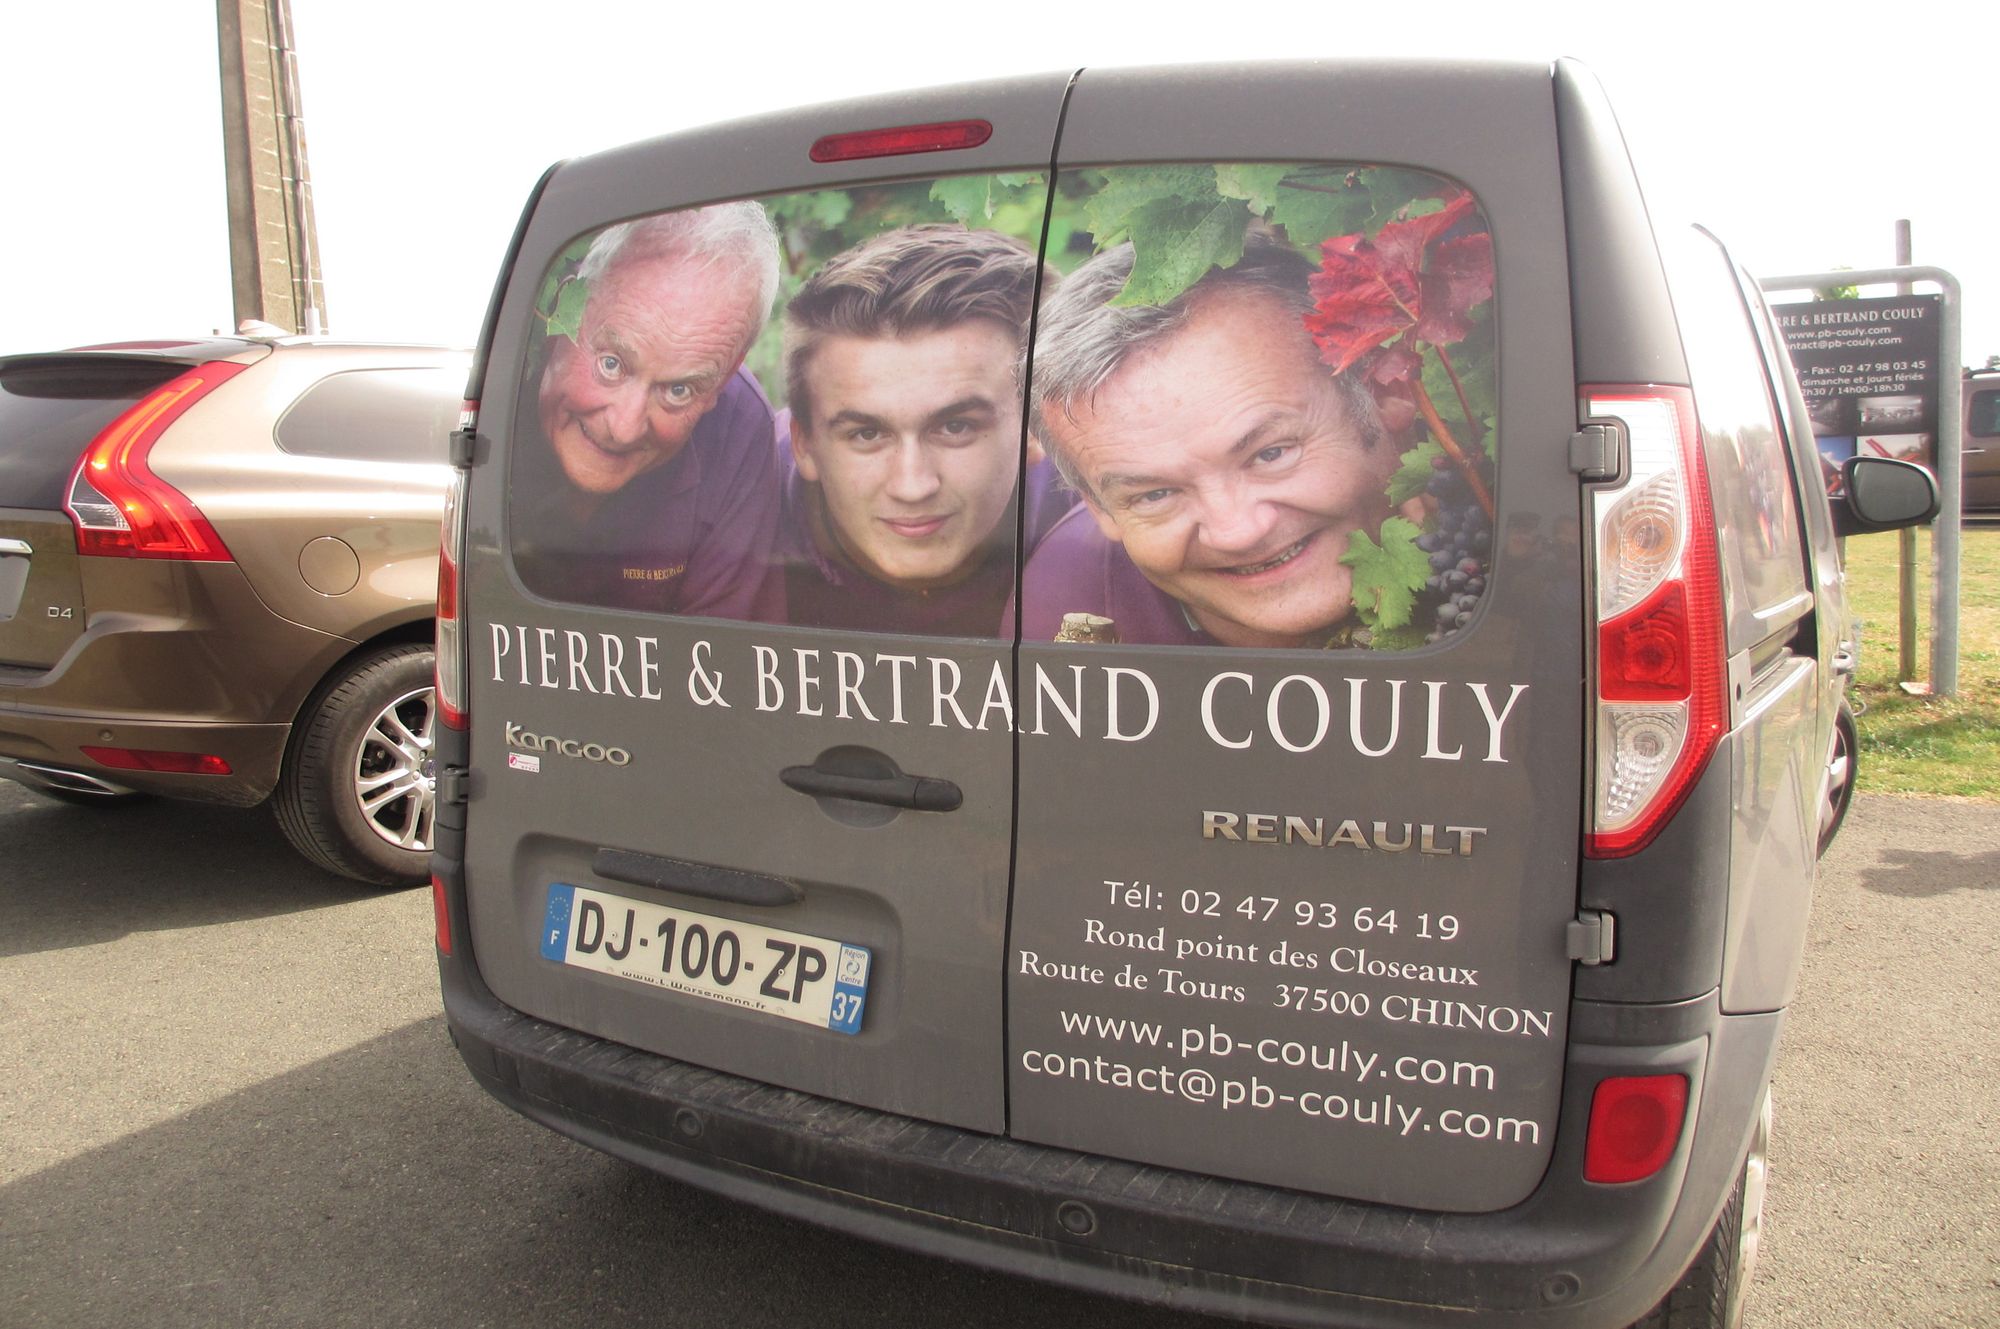 Pierre & Bertrand Couly - Winery Branded Car